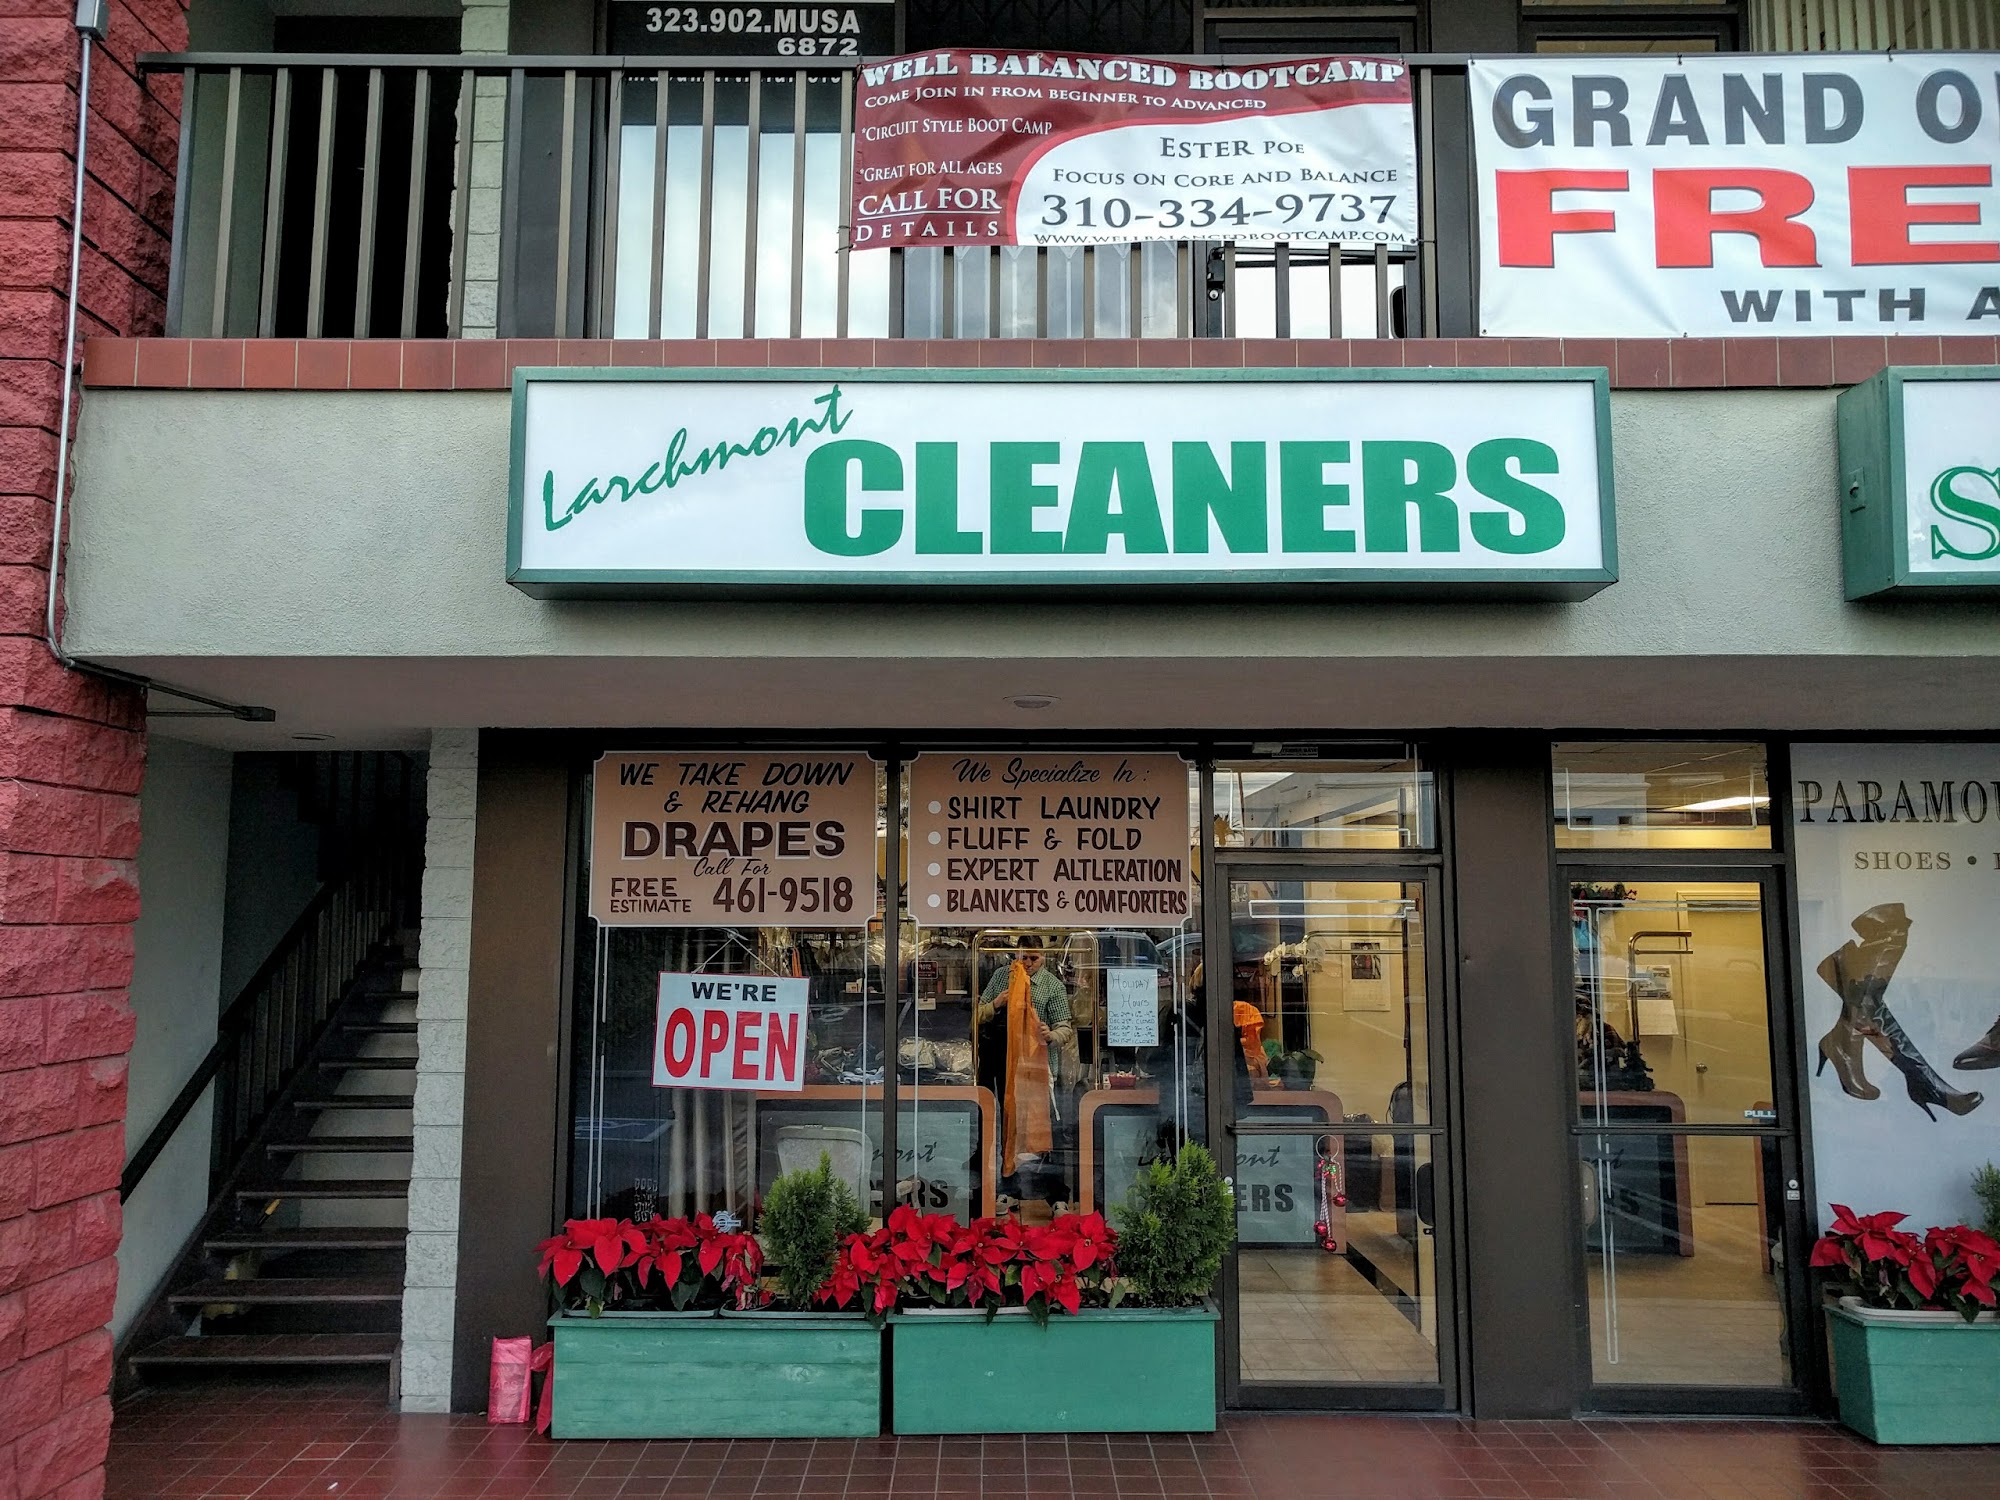 Larchmont Cleaners